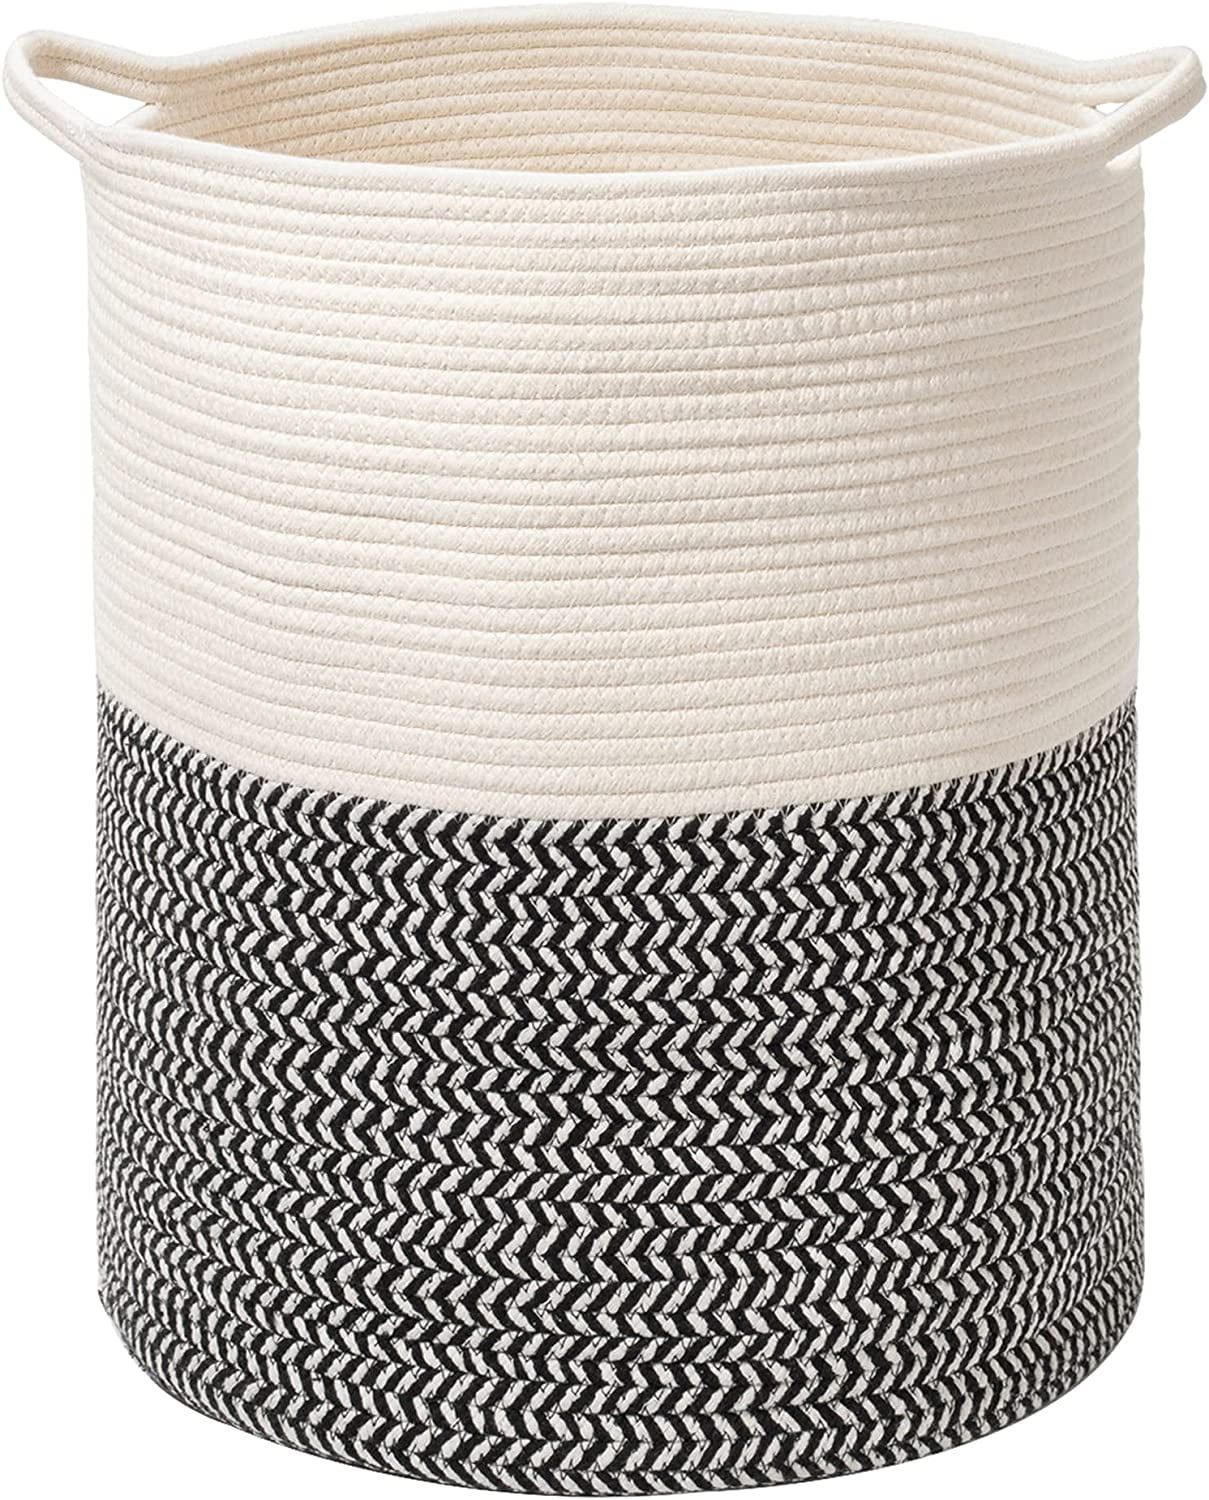 ROKR Woven Rope Laundry Hamper with Handles | Walmart (US)